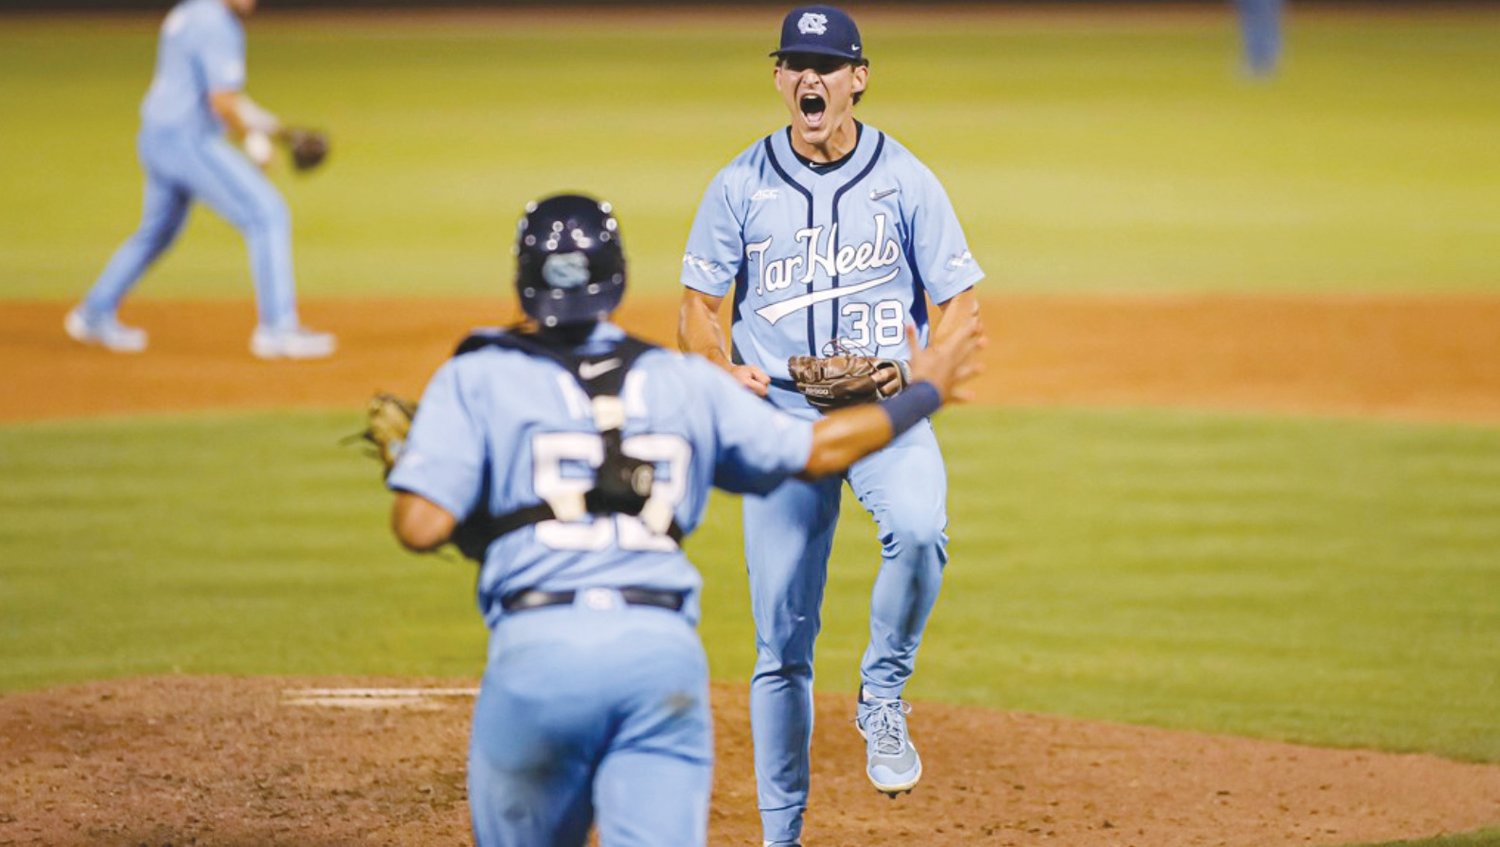 UNC relief pitcher Davis Palermo (38) lets out an emotional celebration after closing out the Tar Heels' 7-3 win over VCU in the NCAA Chapel Hill Regional on June 6 to advance to the Super Regional.